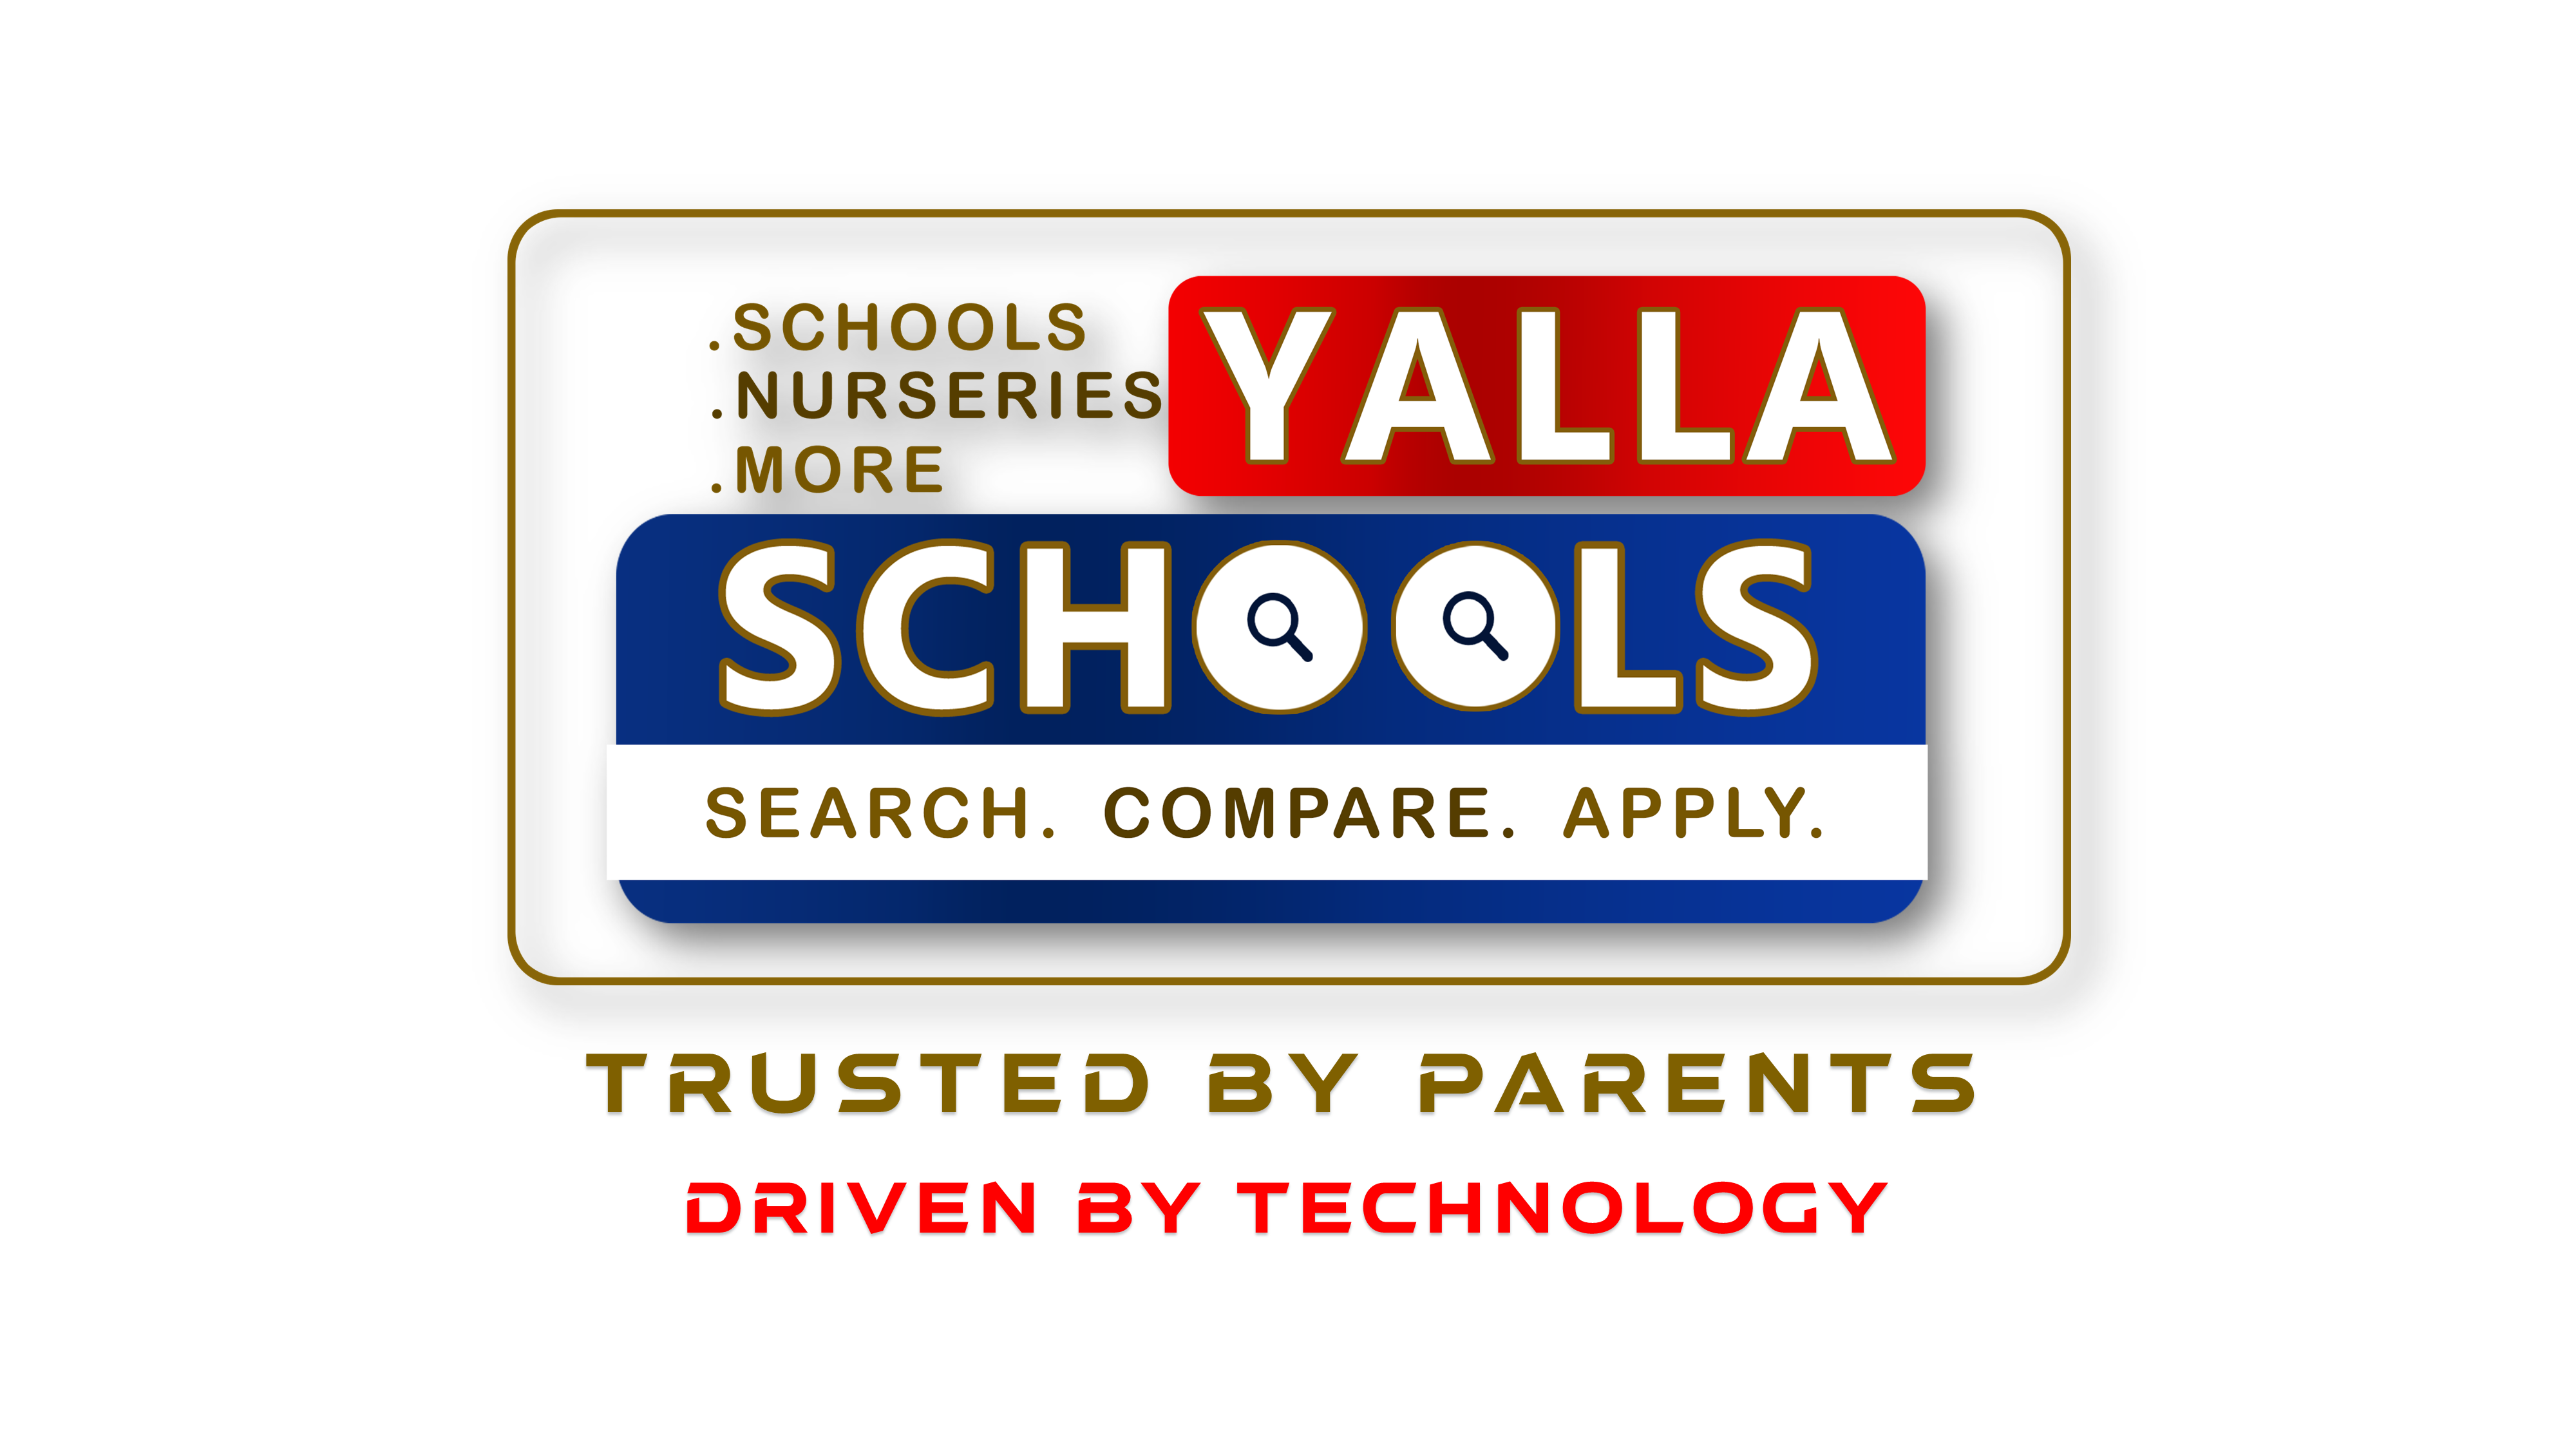 YallaSchools_-_Trusted_by_Parents,_Driven_by_Technology4